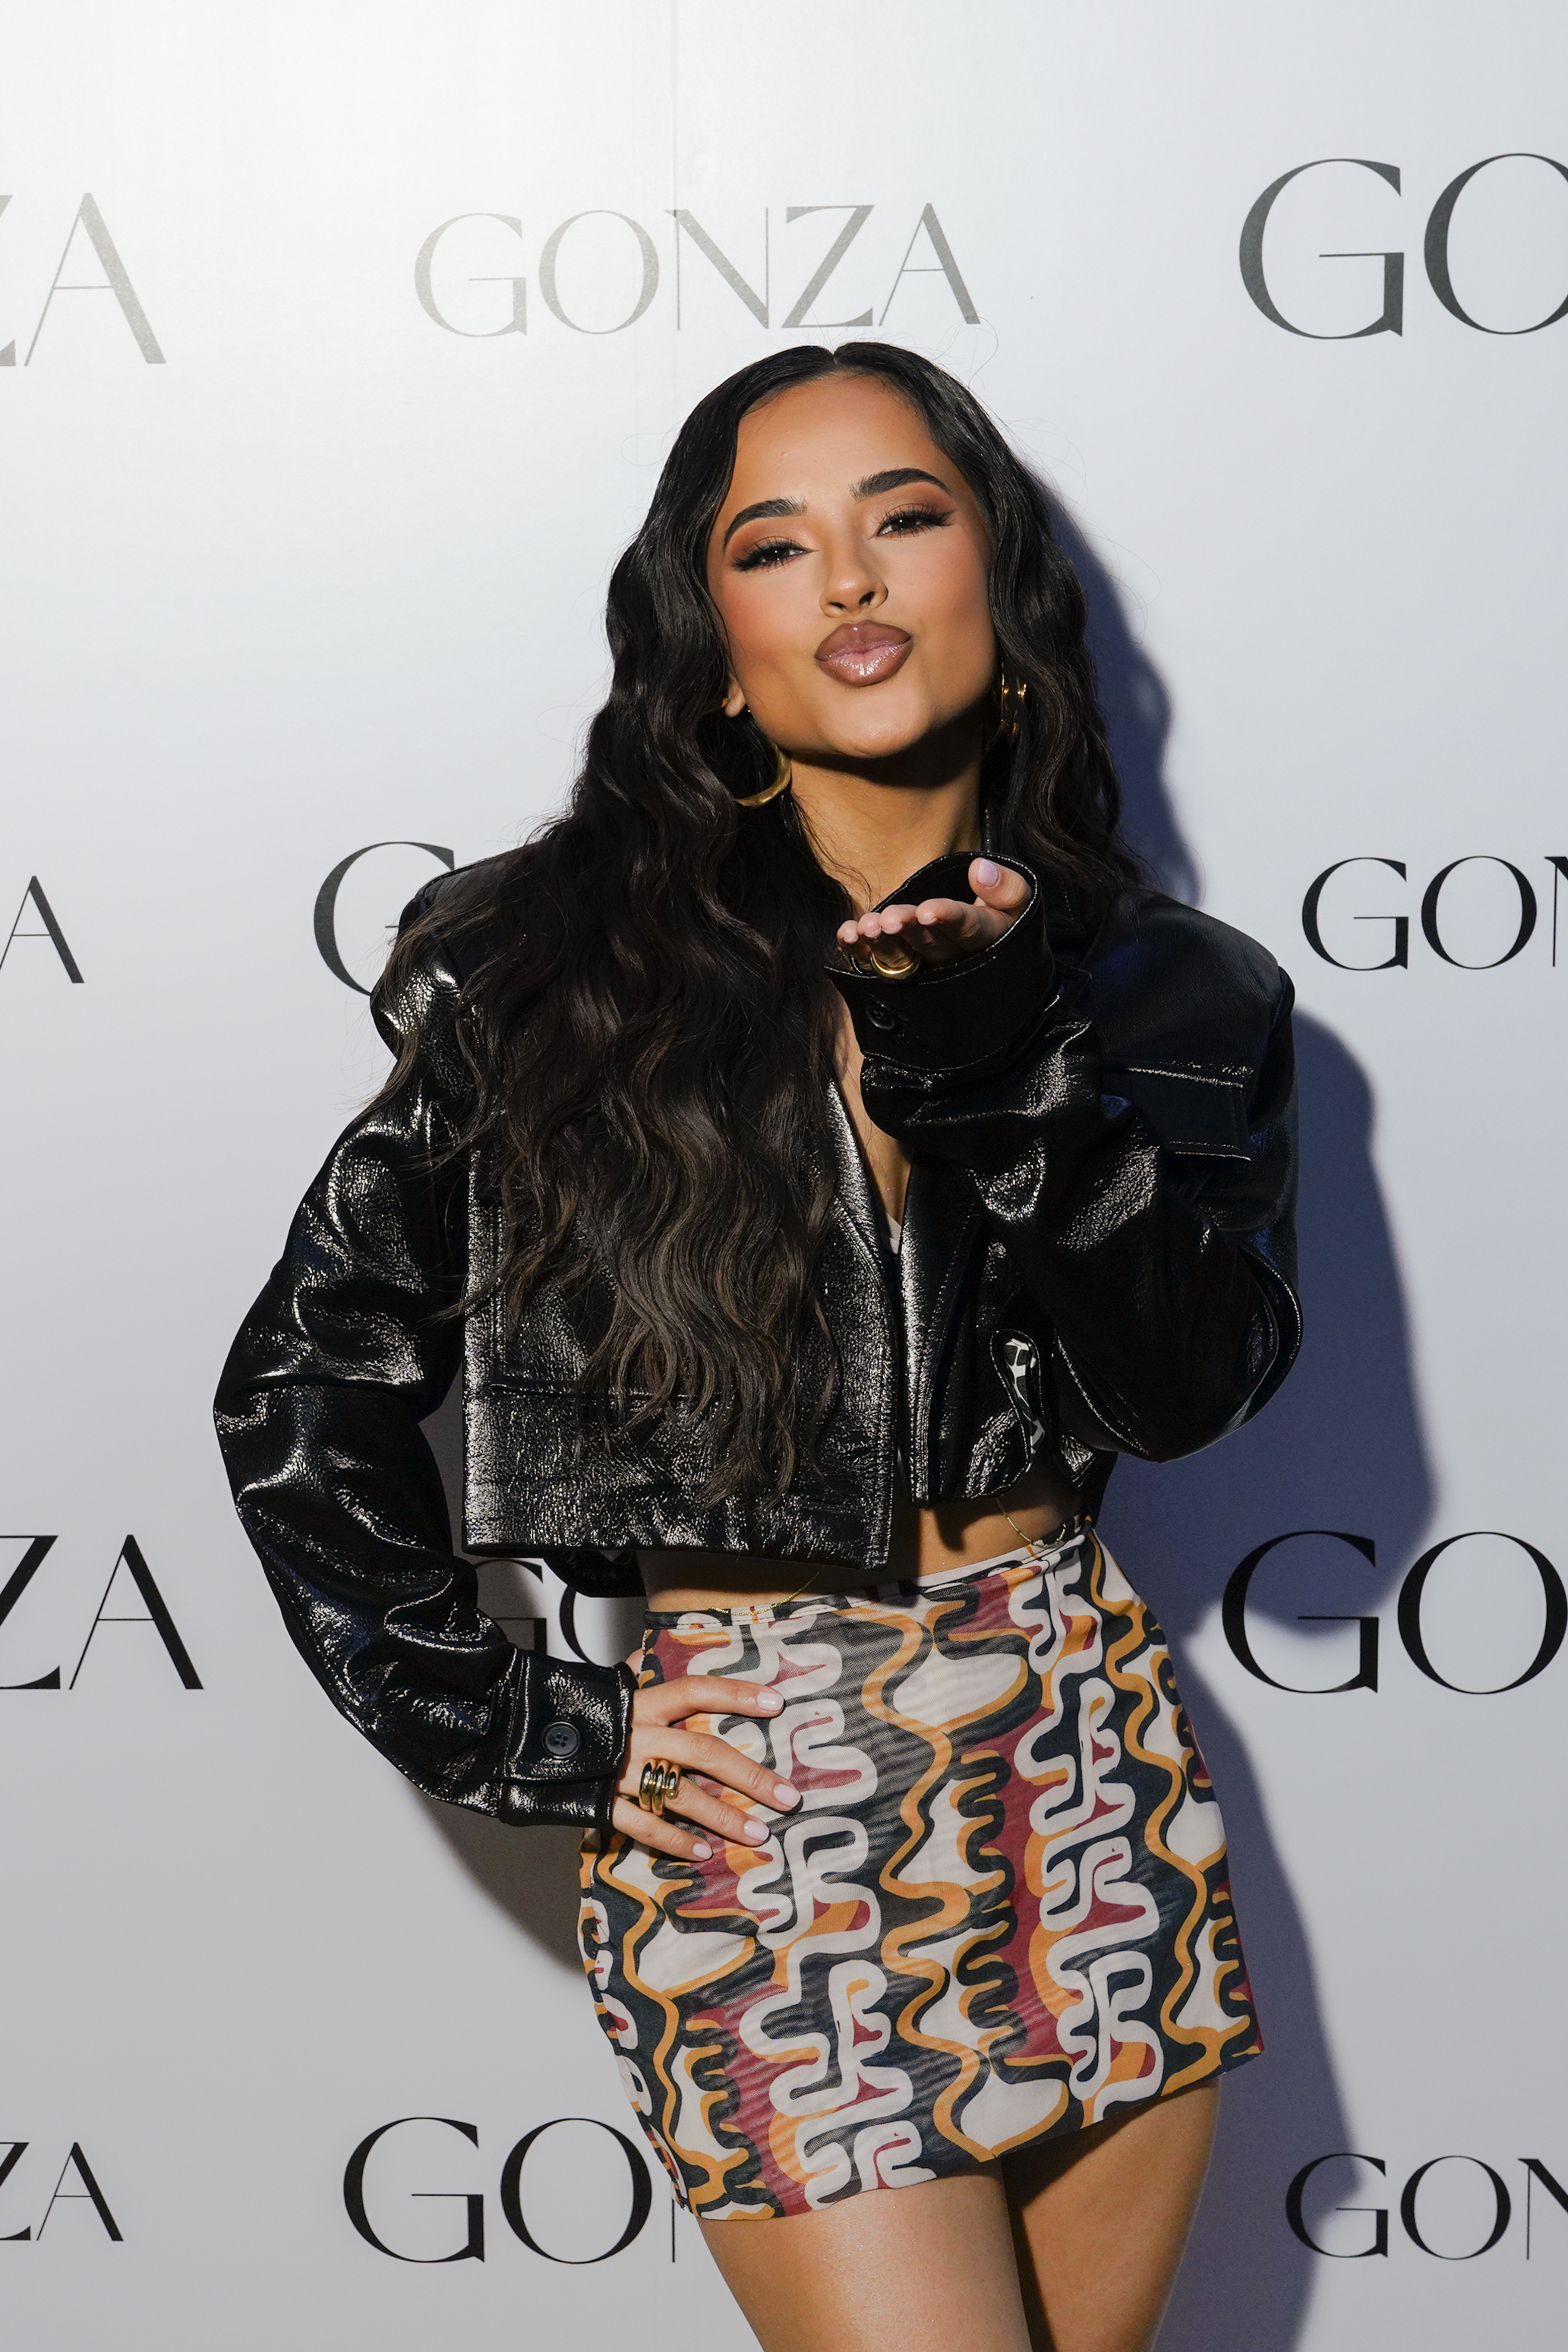 Becky G at an event announcing her as the Creative Director of Gonza on June 28, 2023, in West Hollywood, California. | Source: Getty Images